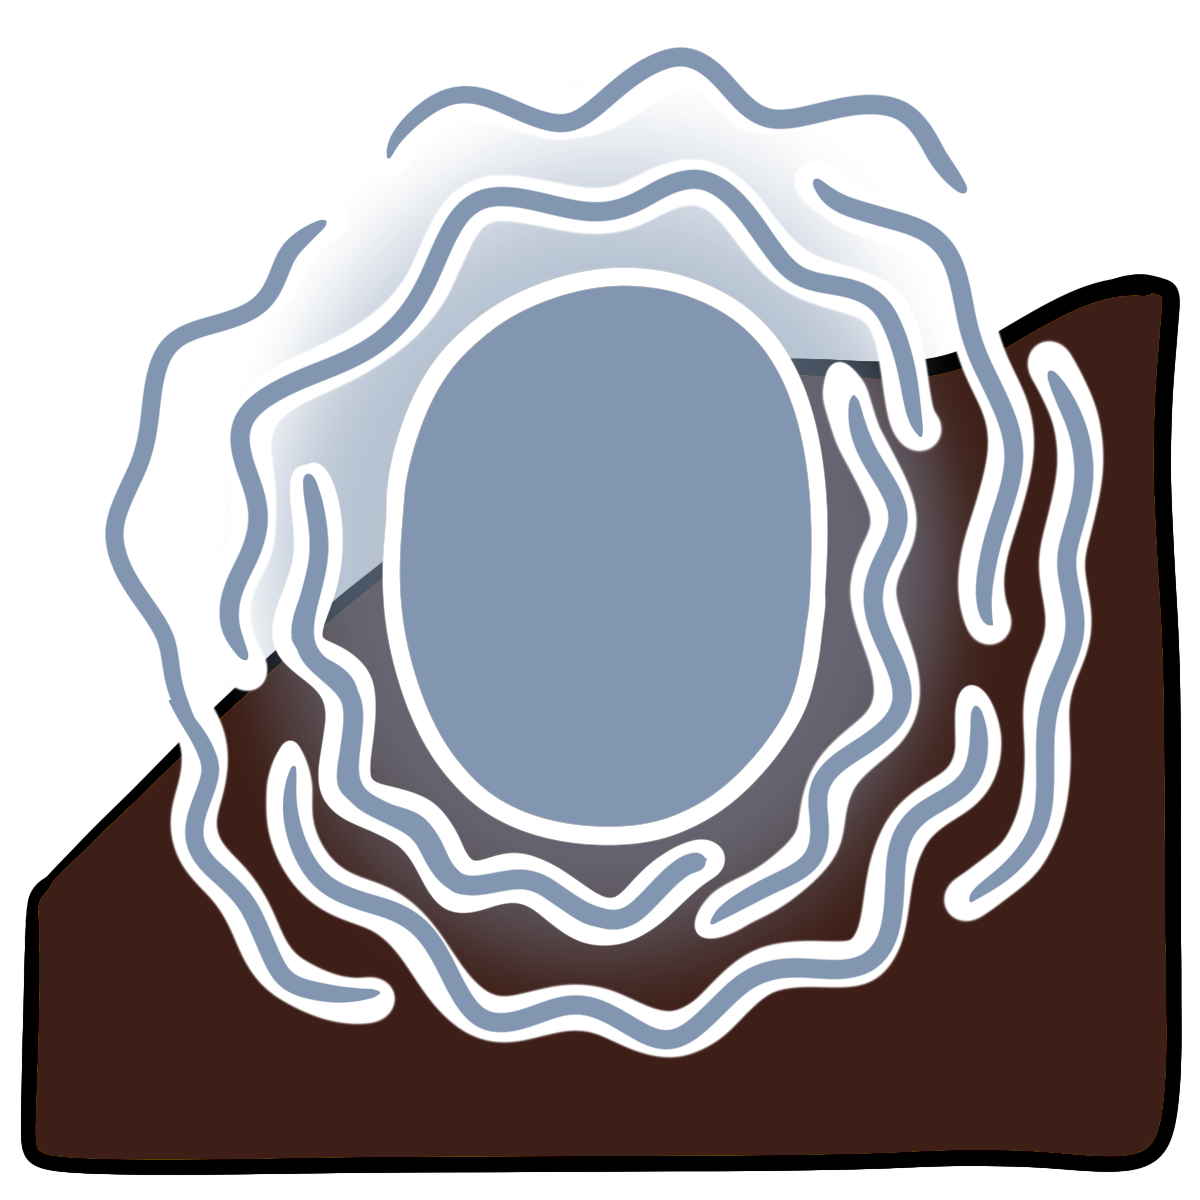 A light blue glowing oval surrounded by squiggly lines. Curved dark brown skin fills the bottom half of the background.